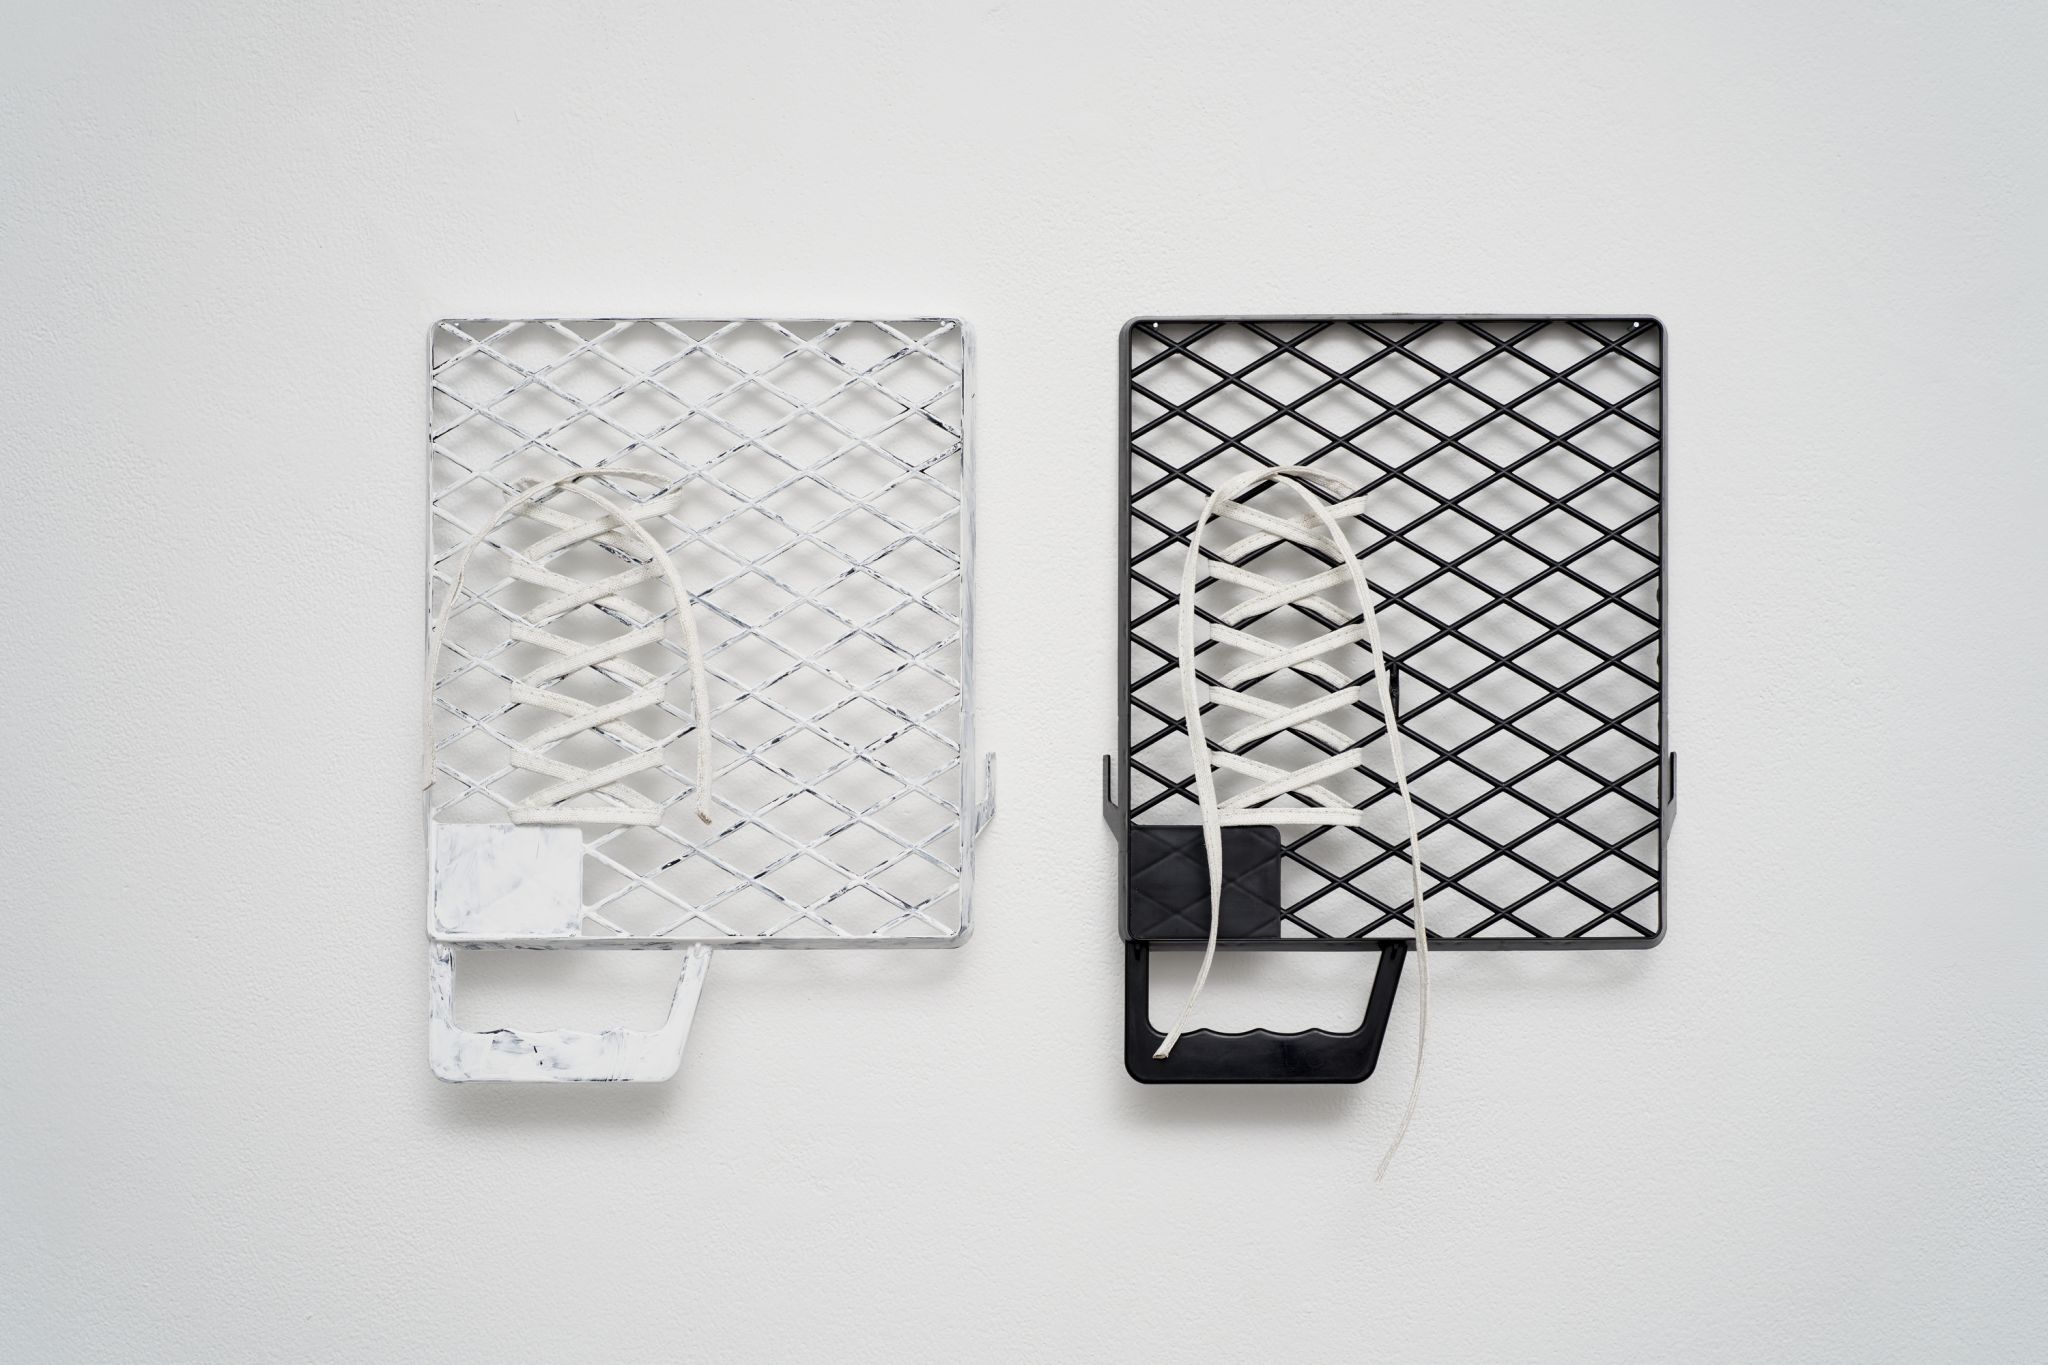 Davide Stucchi, Laces with no traces #1 & #2, 2023, Plastic paint roller grid, domestic wall paint, stitched primed canvas, 29.5 ⁠× ⁠20.5 ⁠× ⁠1 ⁠⁠cm, (each)